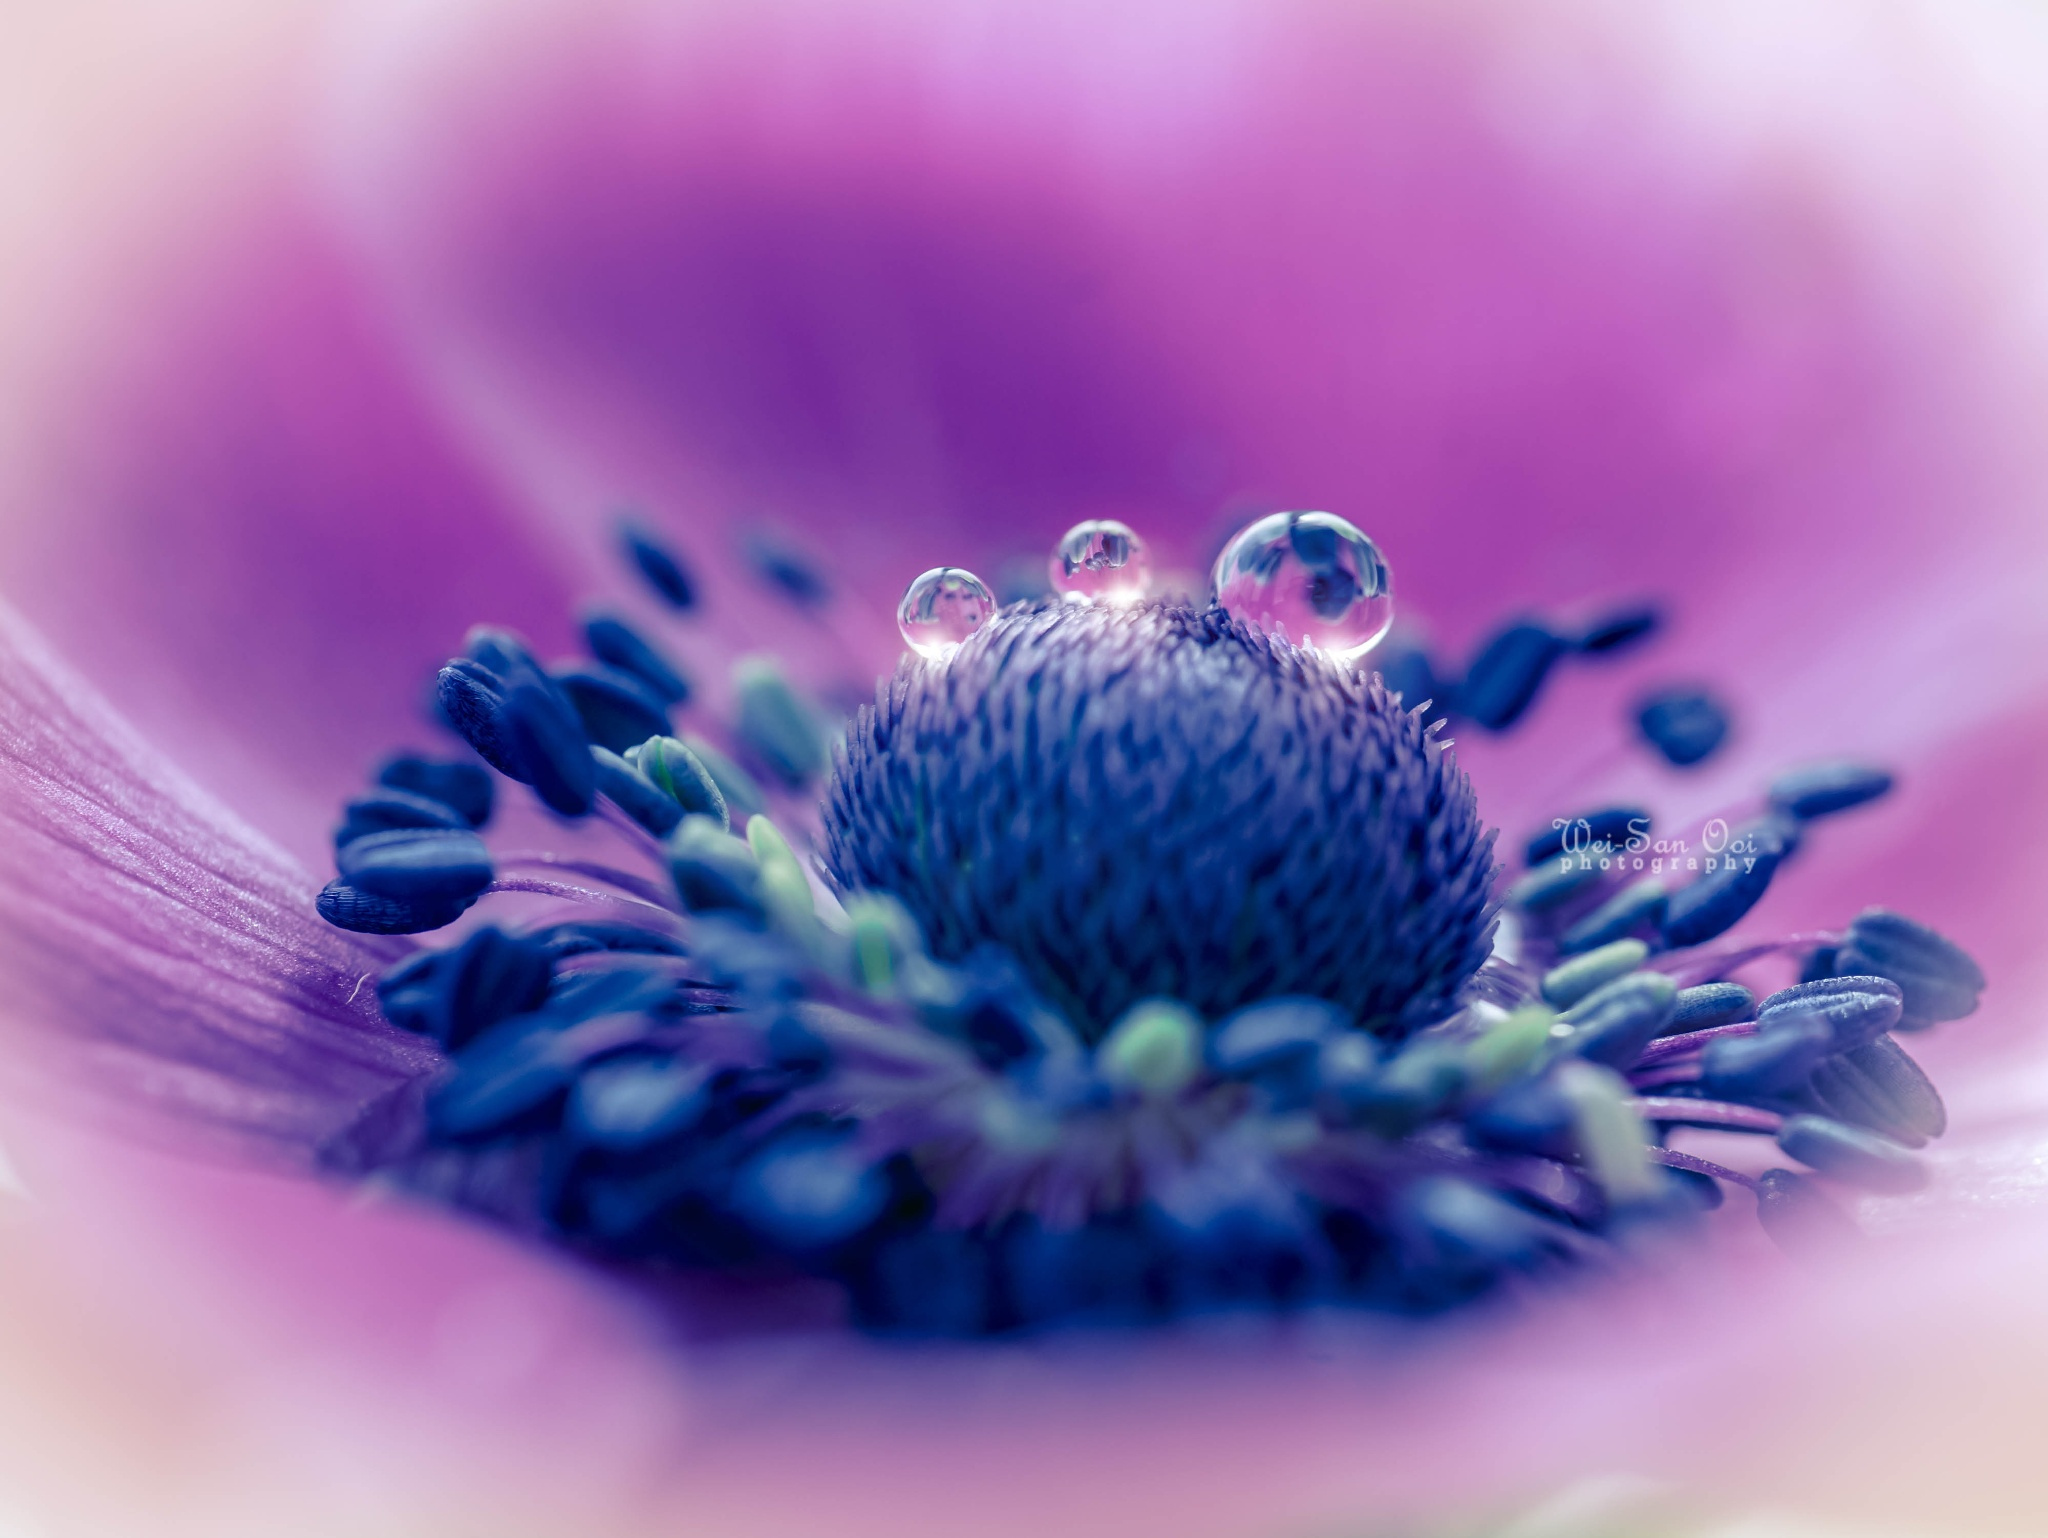 31 Incredibly Captivating Flower Photos by Wei-San Ooi